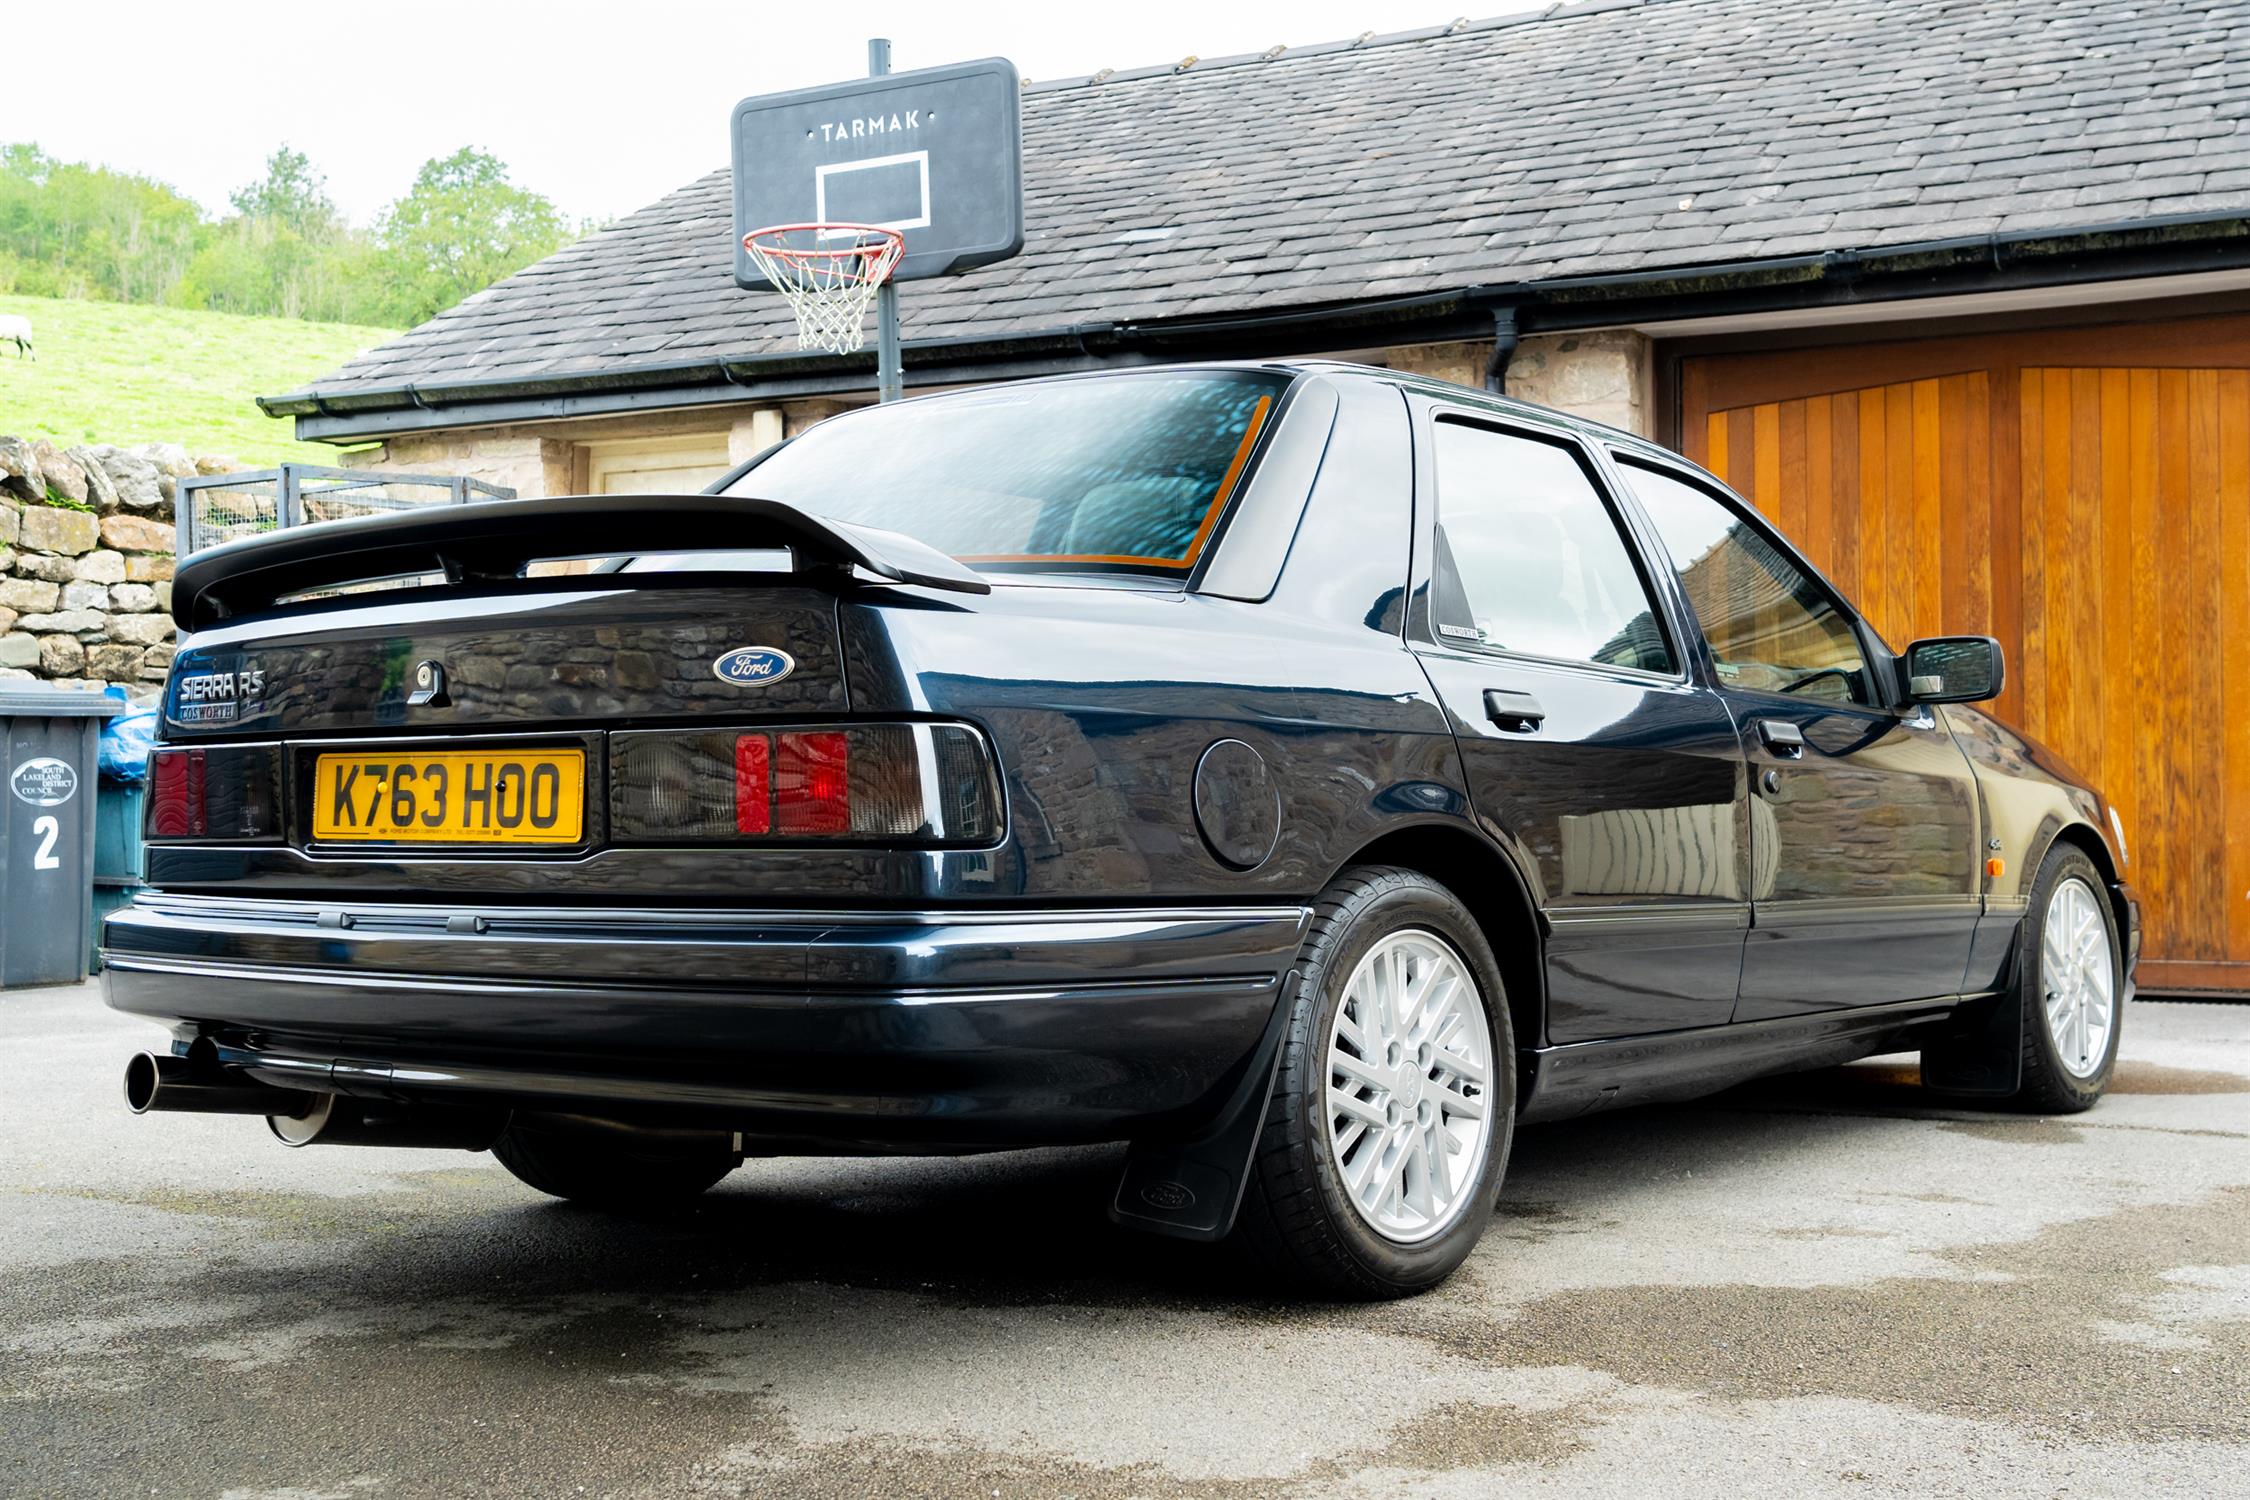 1993 Ford Sierra Sapphire Cosworth - Image 5 of 10